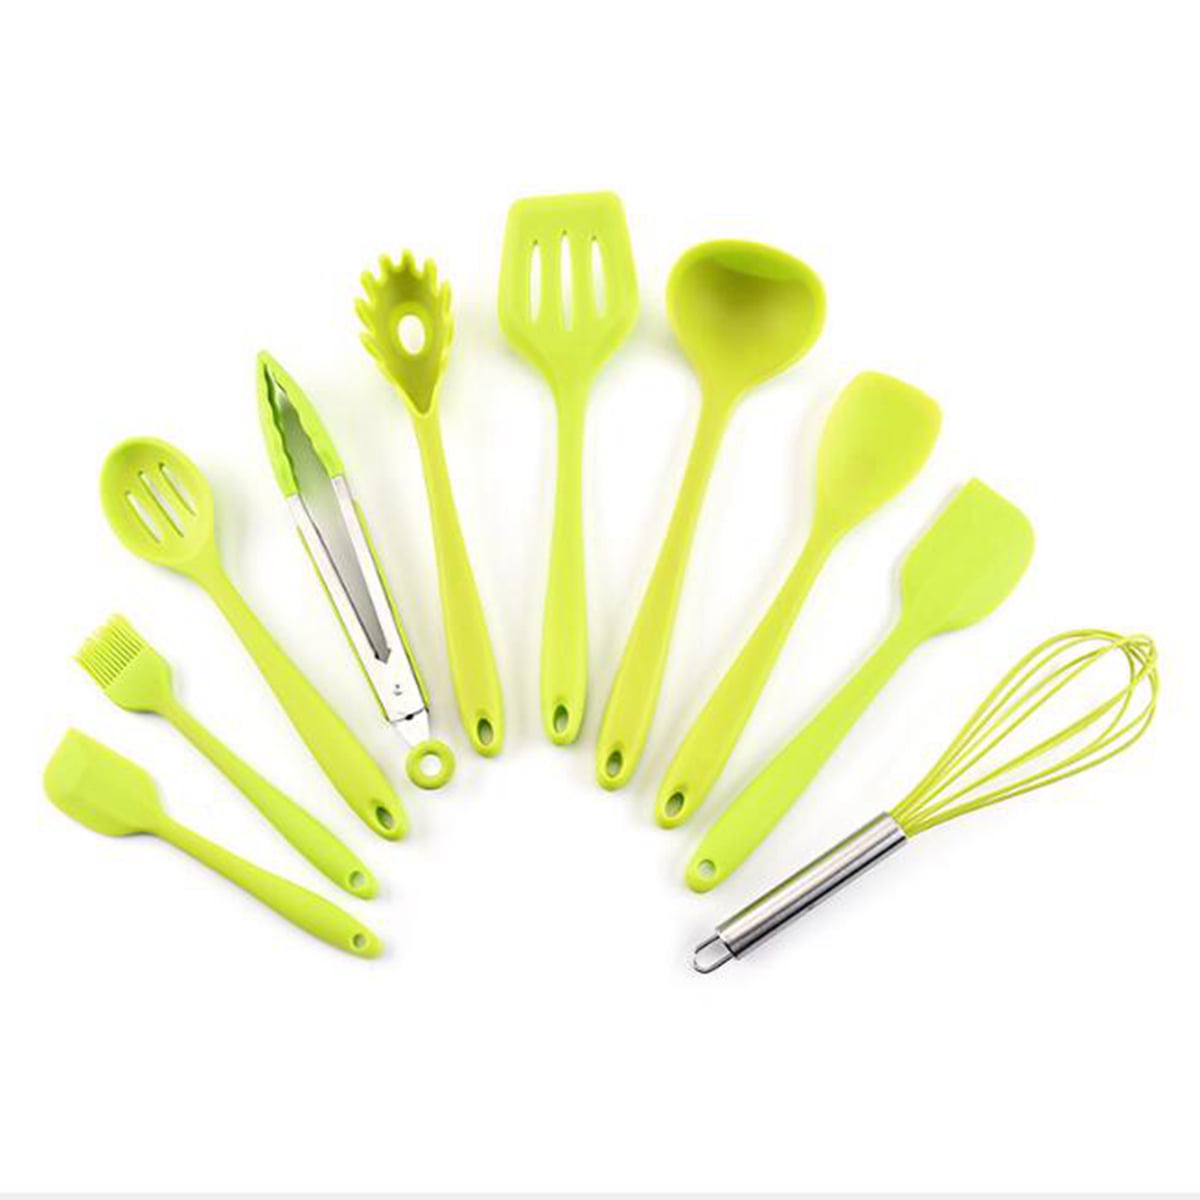 10pcs Silicone Heat Resistant Kitchen Cooking Utensils Baking Tool Green 